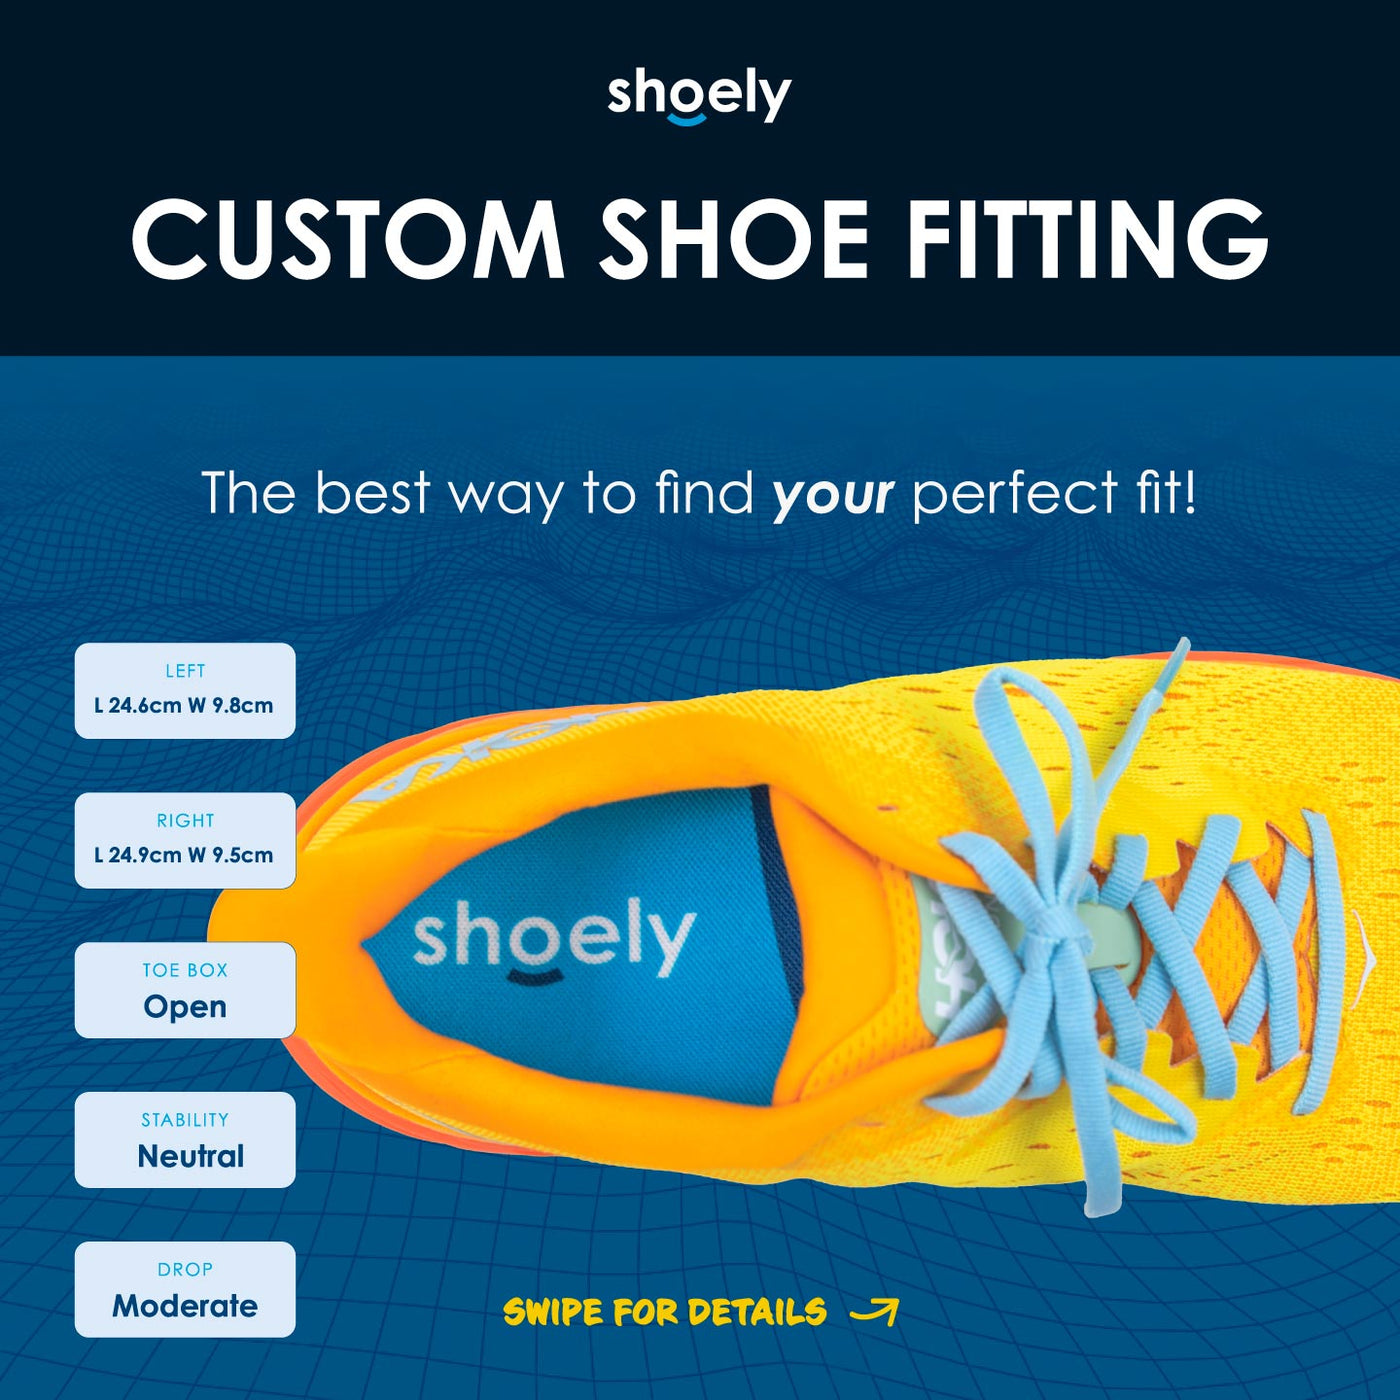 Custom Shoe Fitting - Special Event Offer